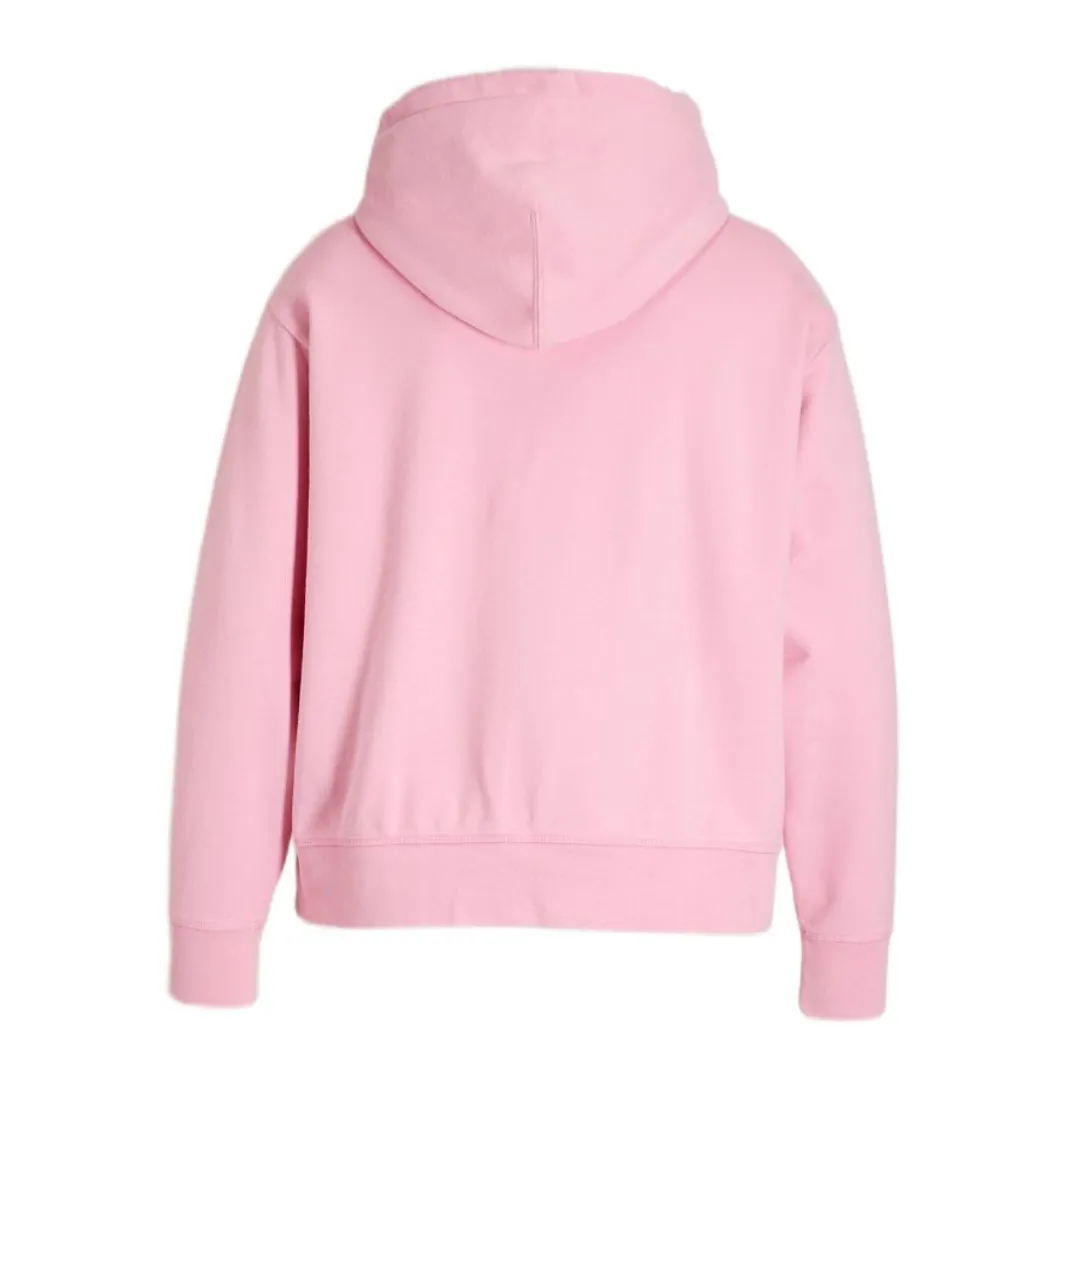 Levi's Womenss Levis Plus Graphic Standard Hoody in Pink Cotton